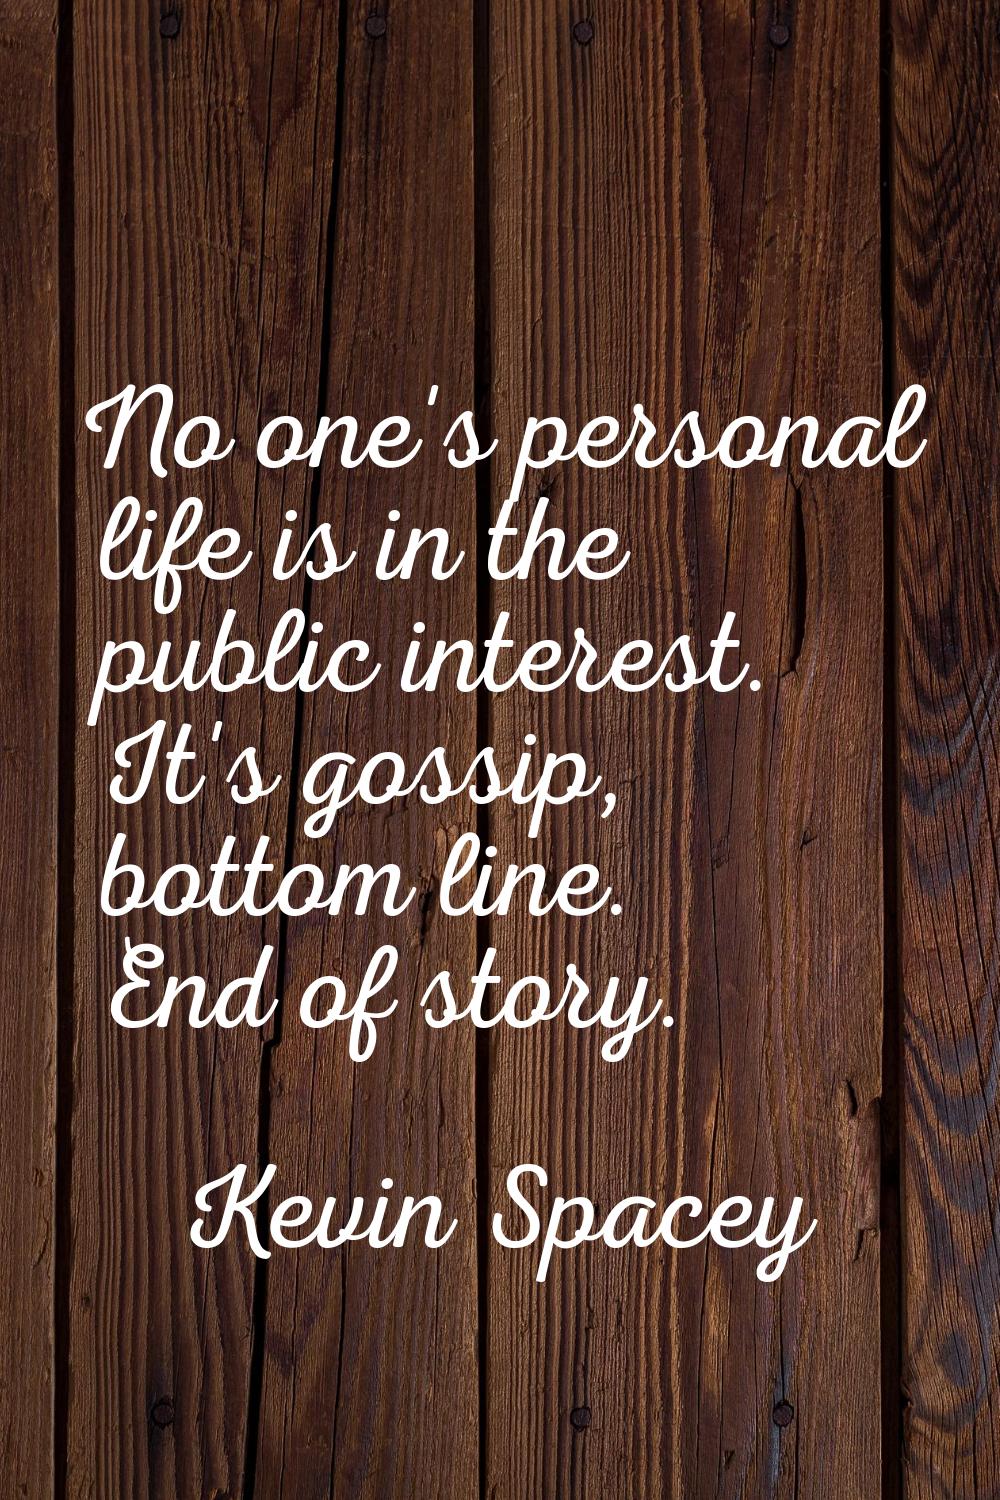 No one's personal life is in the public interest. It's gossip, bottom line. End of story.